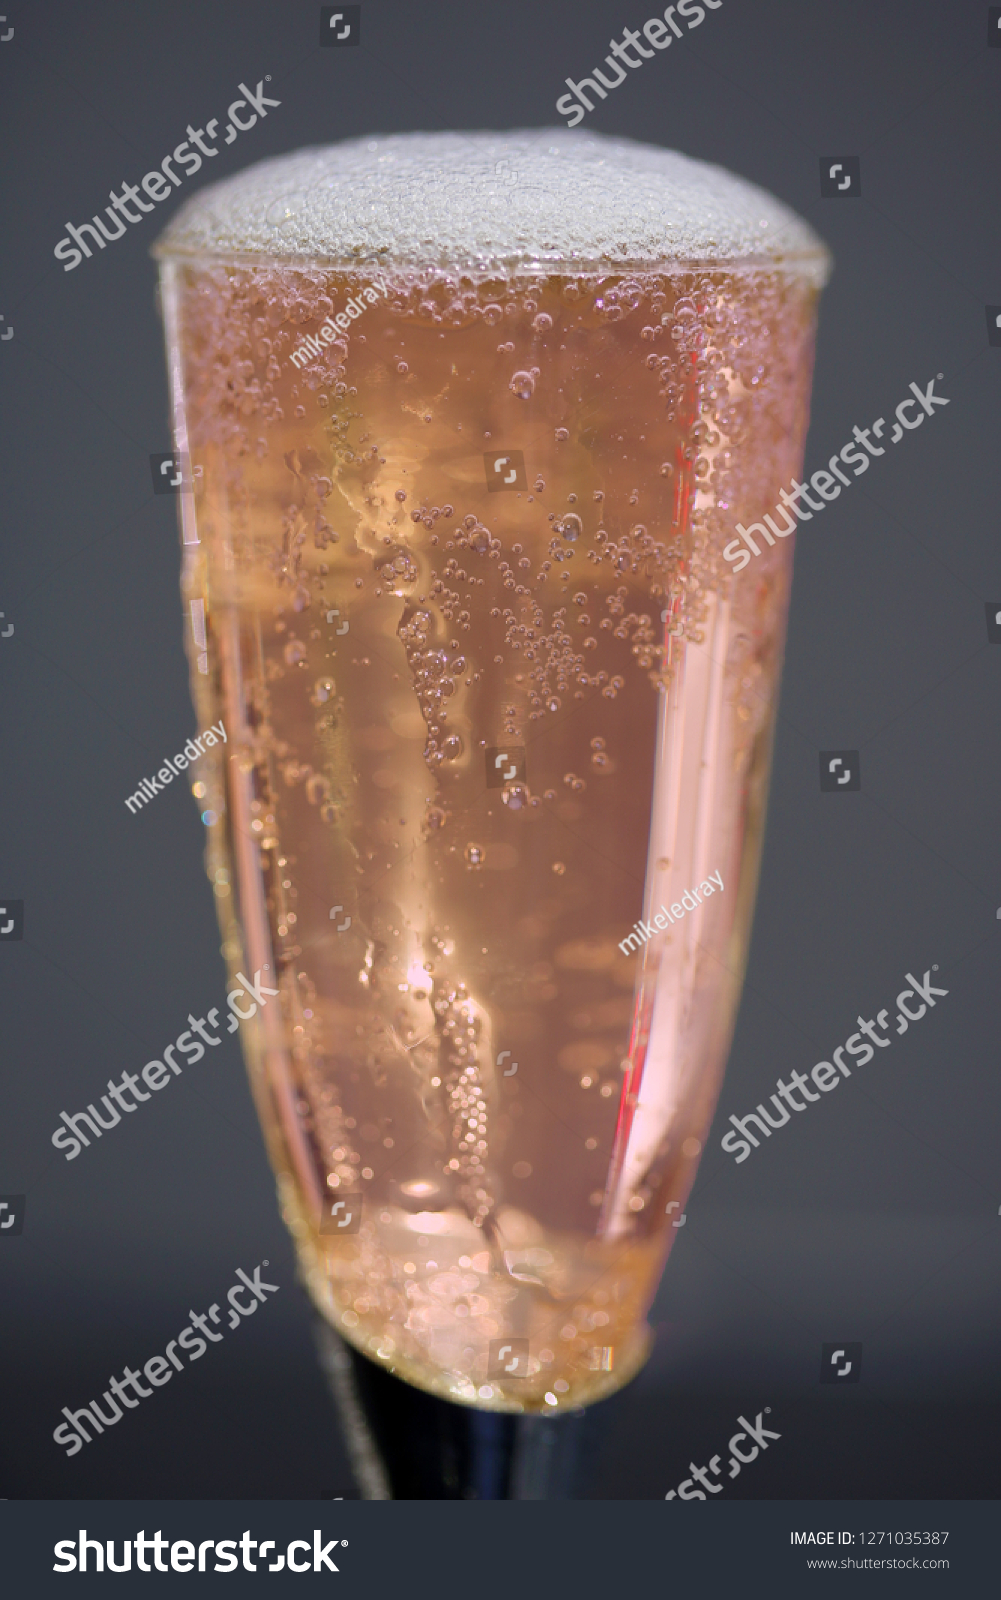 Champagne. Pink Champagne in a Glass. Champagne bubbles in a Champagne Glass. New Years Eve.  #1271035387